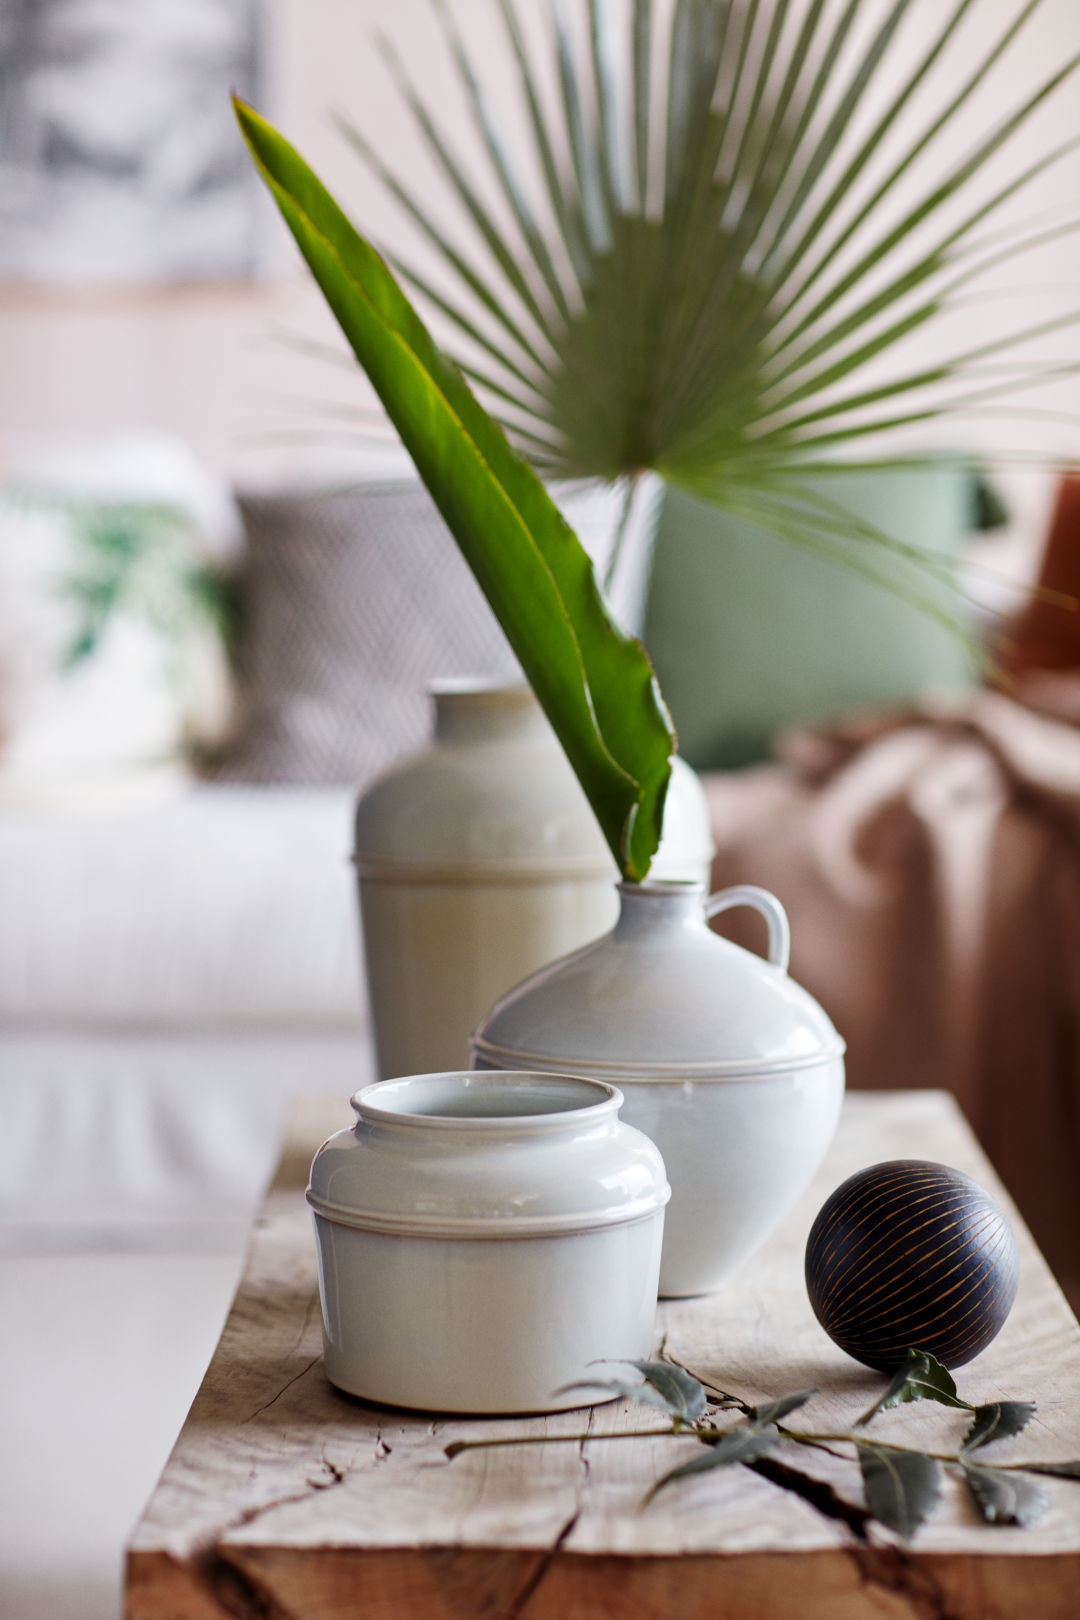 Earthenware-vessels-from-HM-Home